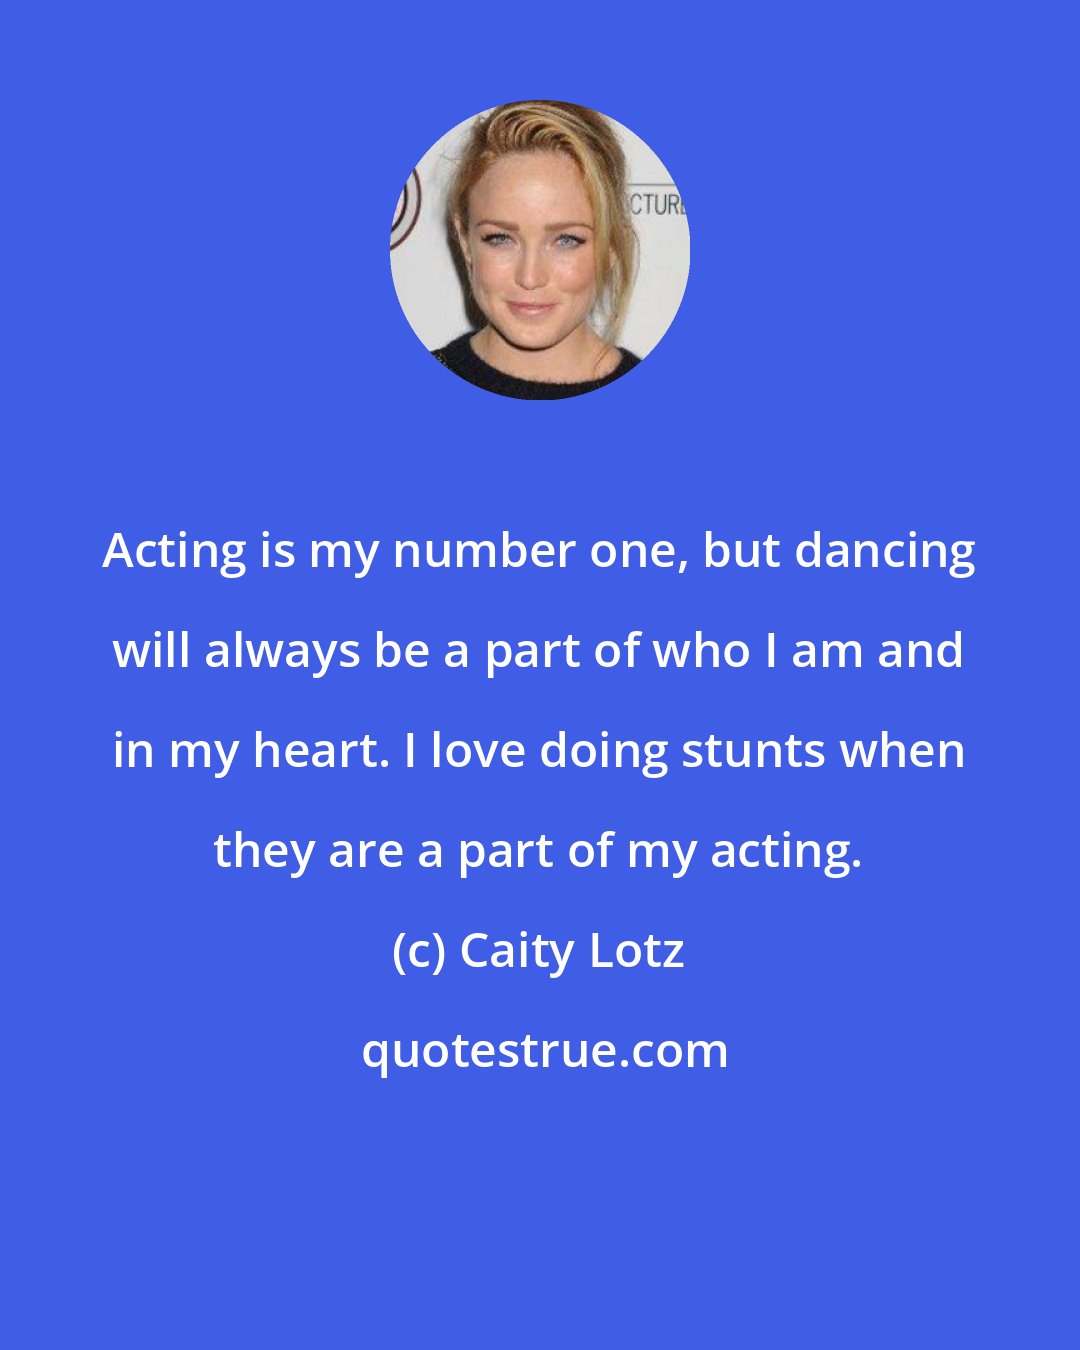 Caity Lotz: Acting is my number one, but dancing will always be a part of who I am and in my heart. I love doing stunts when they are a part of my acting.